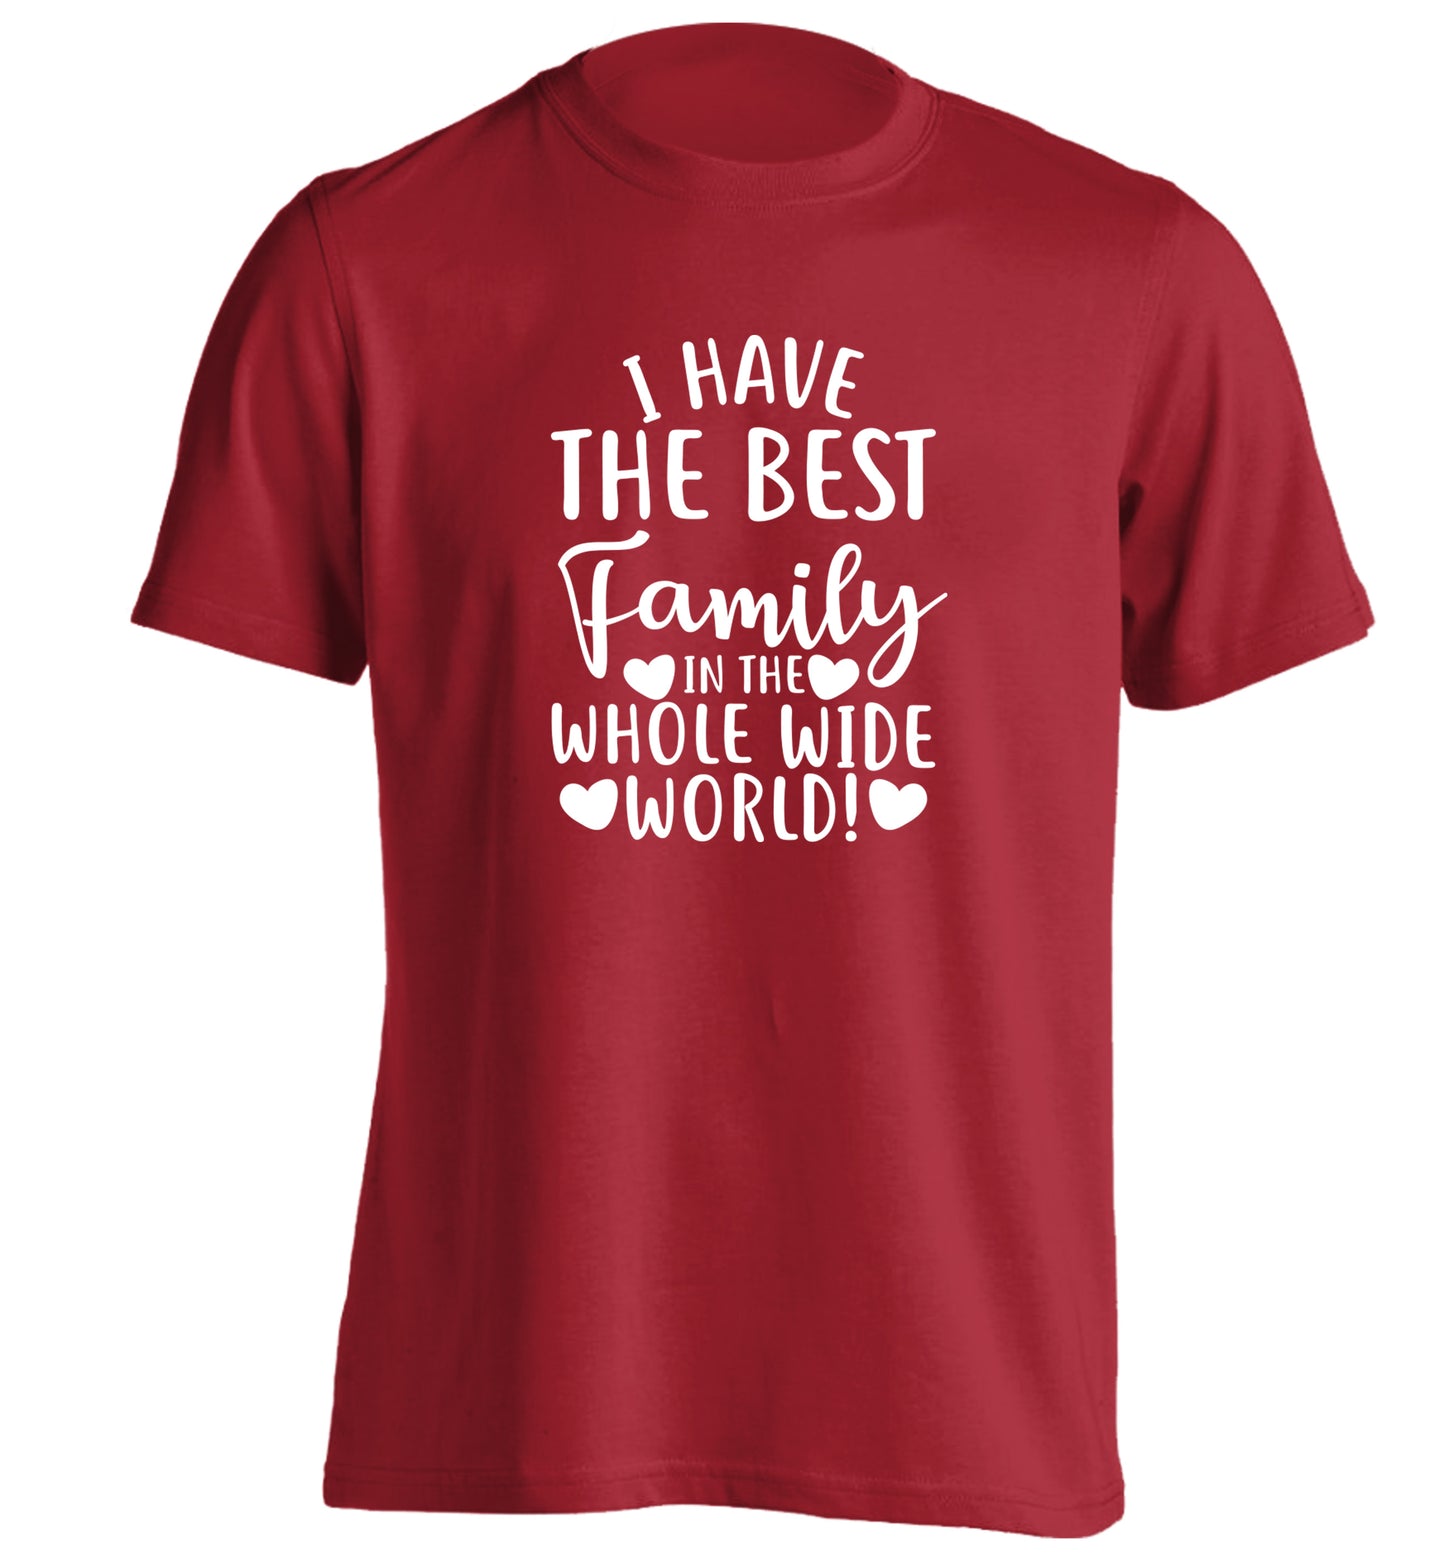 I have the best family in the whole wide world! adults unisex red Tshirt 2XL